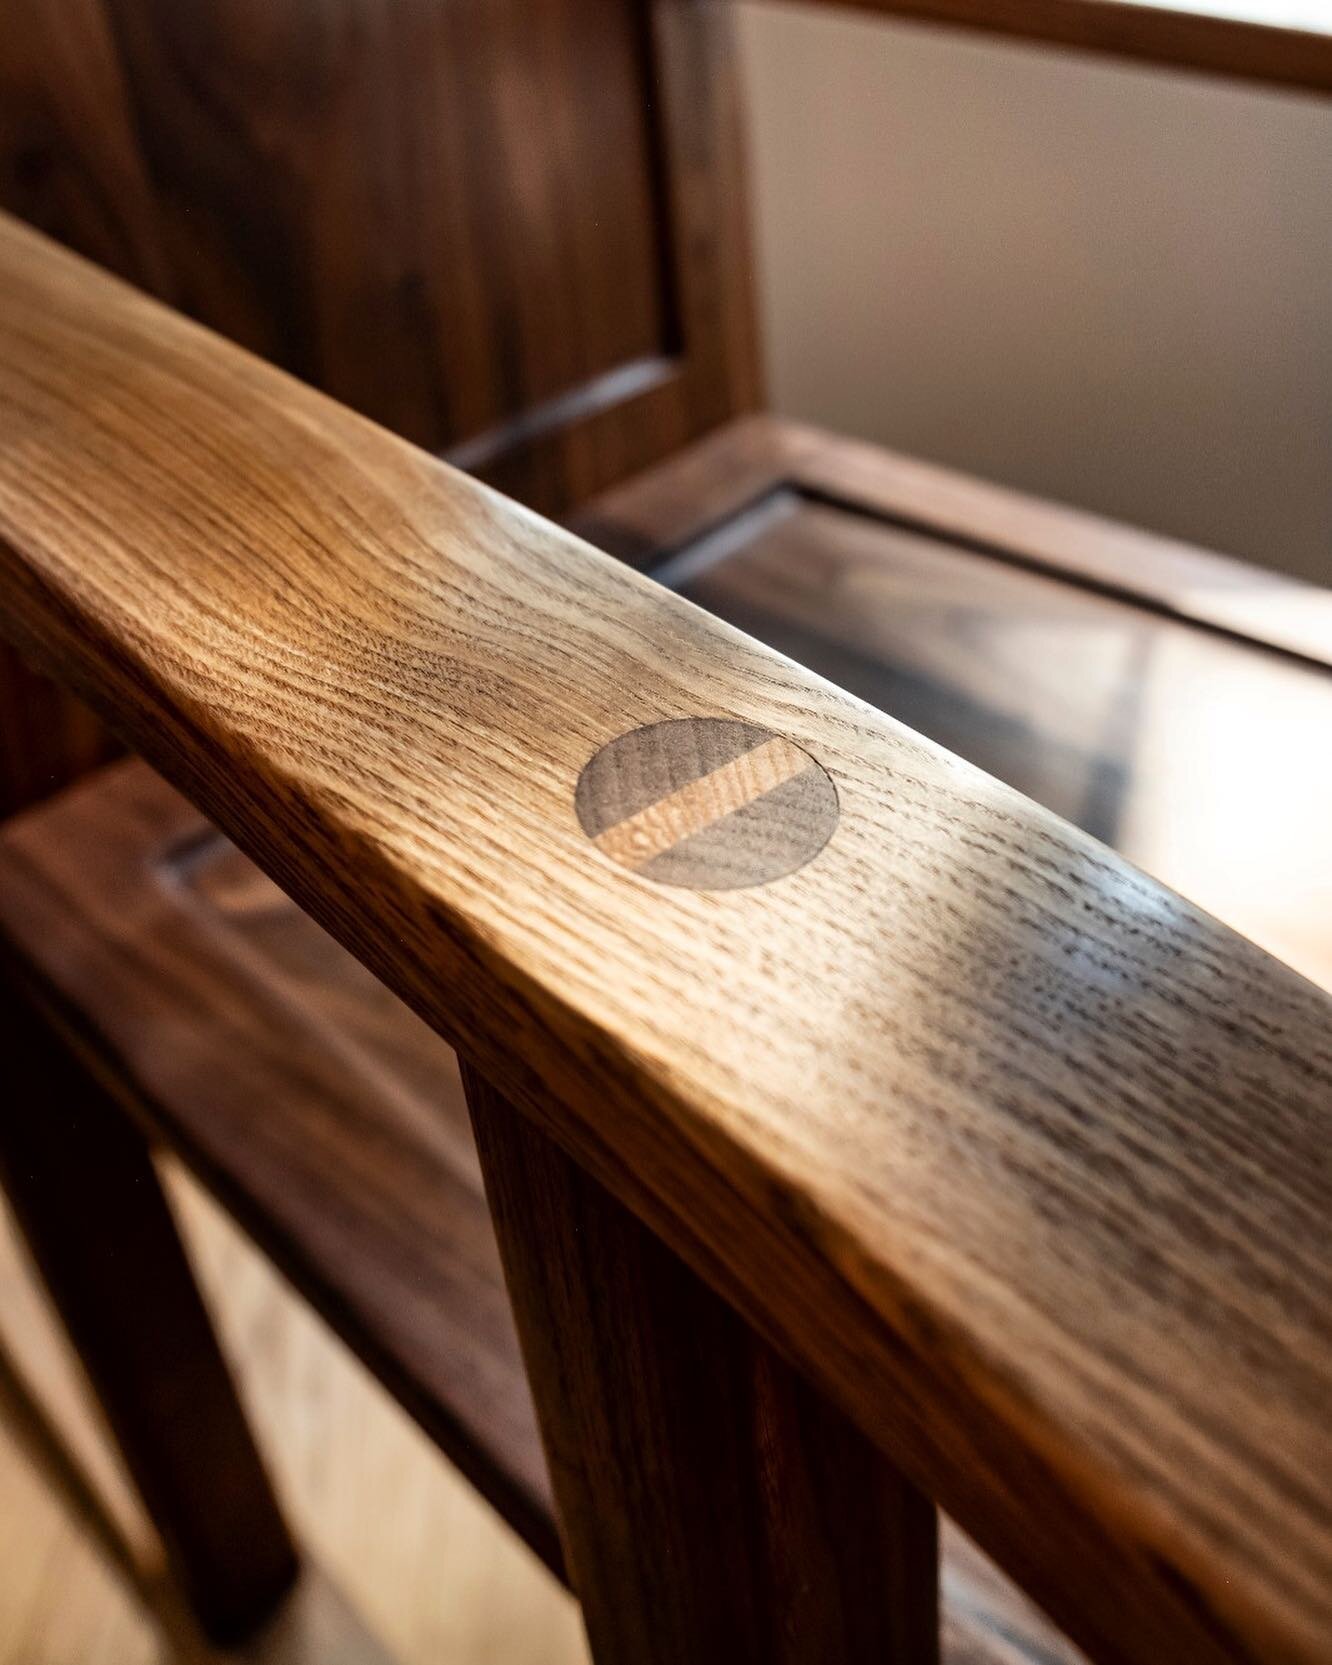 The details are what elevate a piece of furniture from nice to great. We like to consider function, feel, and form when planning our designs, right down to which direction our wedges are applied.

.
.

#workshop #furnitureMaker #bespoke #customFurnit